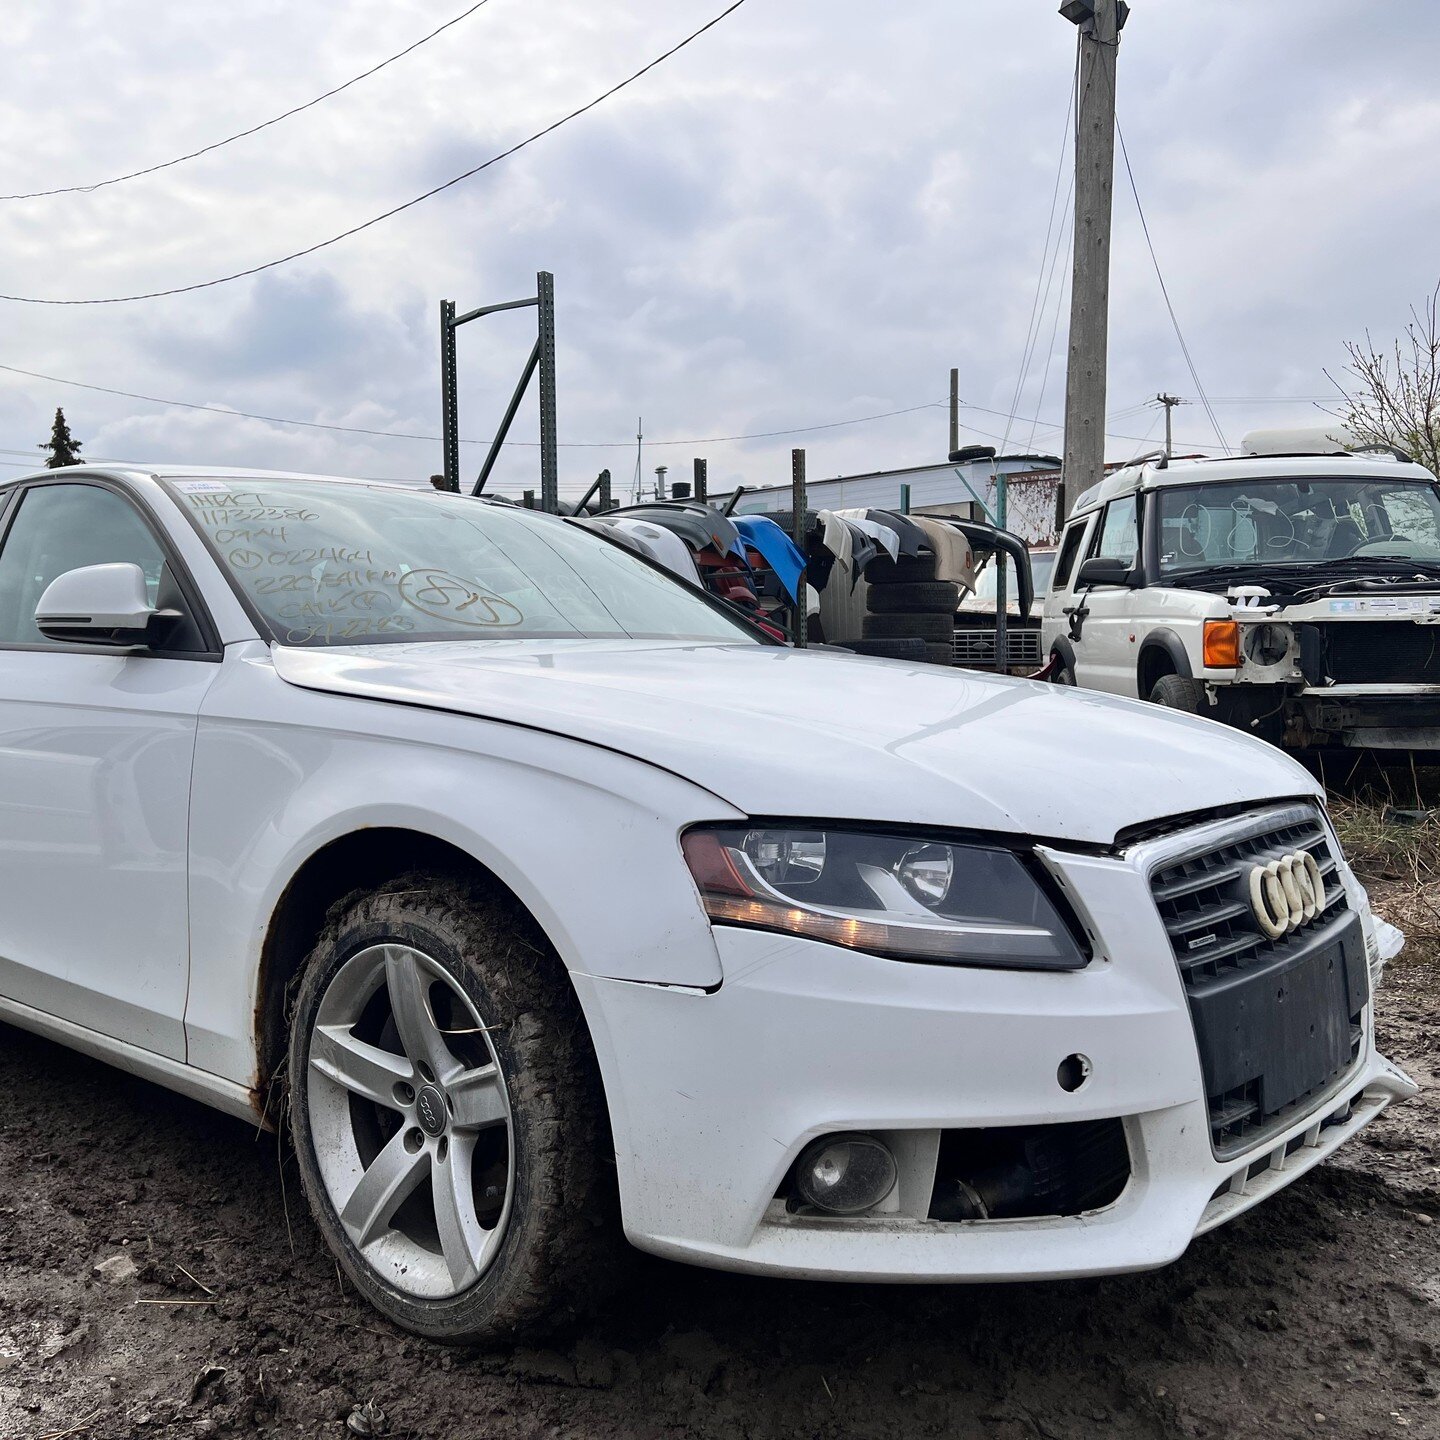 2009 AUDI A4 QUATTRO 2.0T *FOR PARTS* - AWD, AUTOMATIC TIPTRONIC TRANSMISSION, 4 CYLINDER , WHITE(LY9C), KMS:220542, VIN:WAULF68K59N022464

We offer contactless delivery and are more than willing to accommodate your needs.
Why pick your part when we 